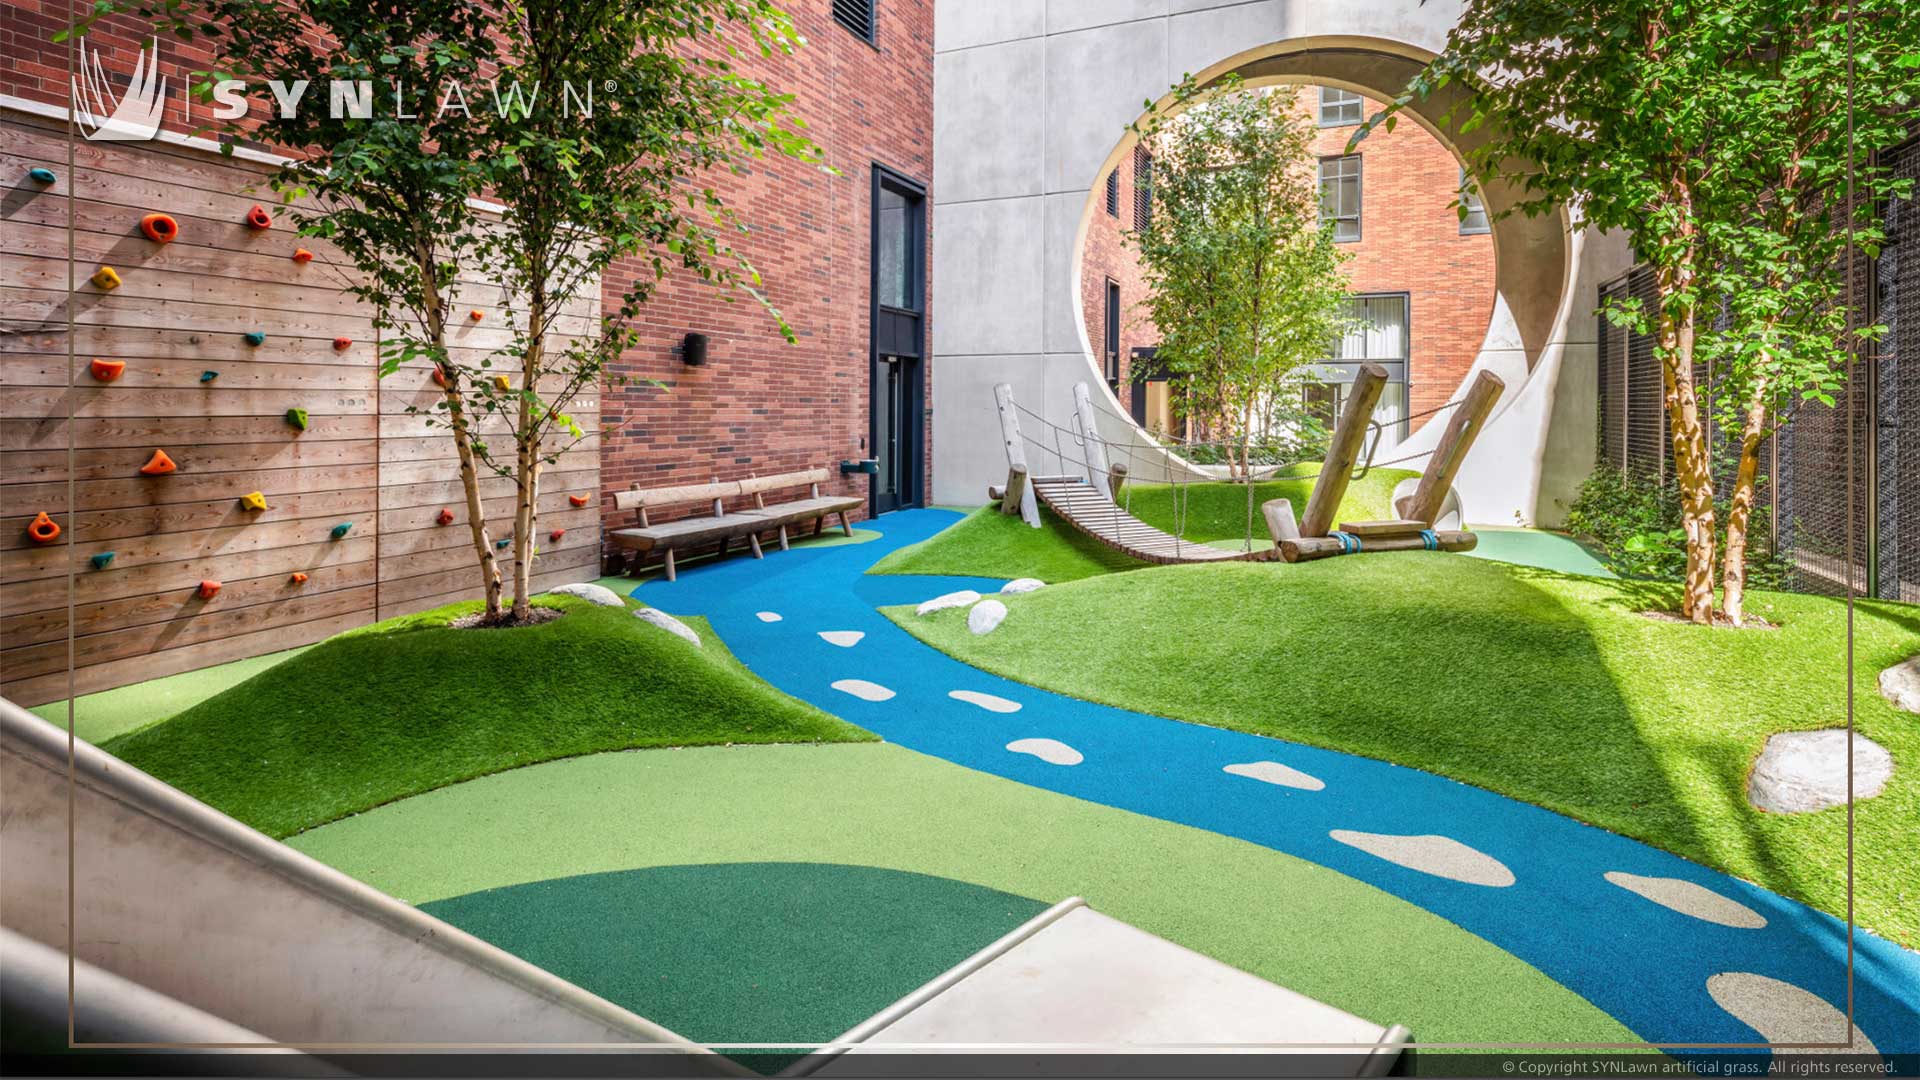 SYNLawn Des Moines IA roof rooftop artificial turf play maze